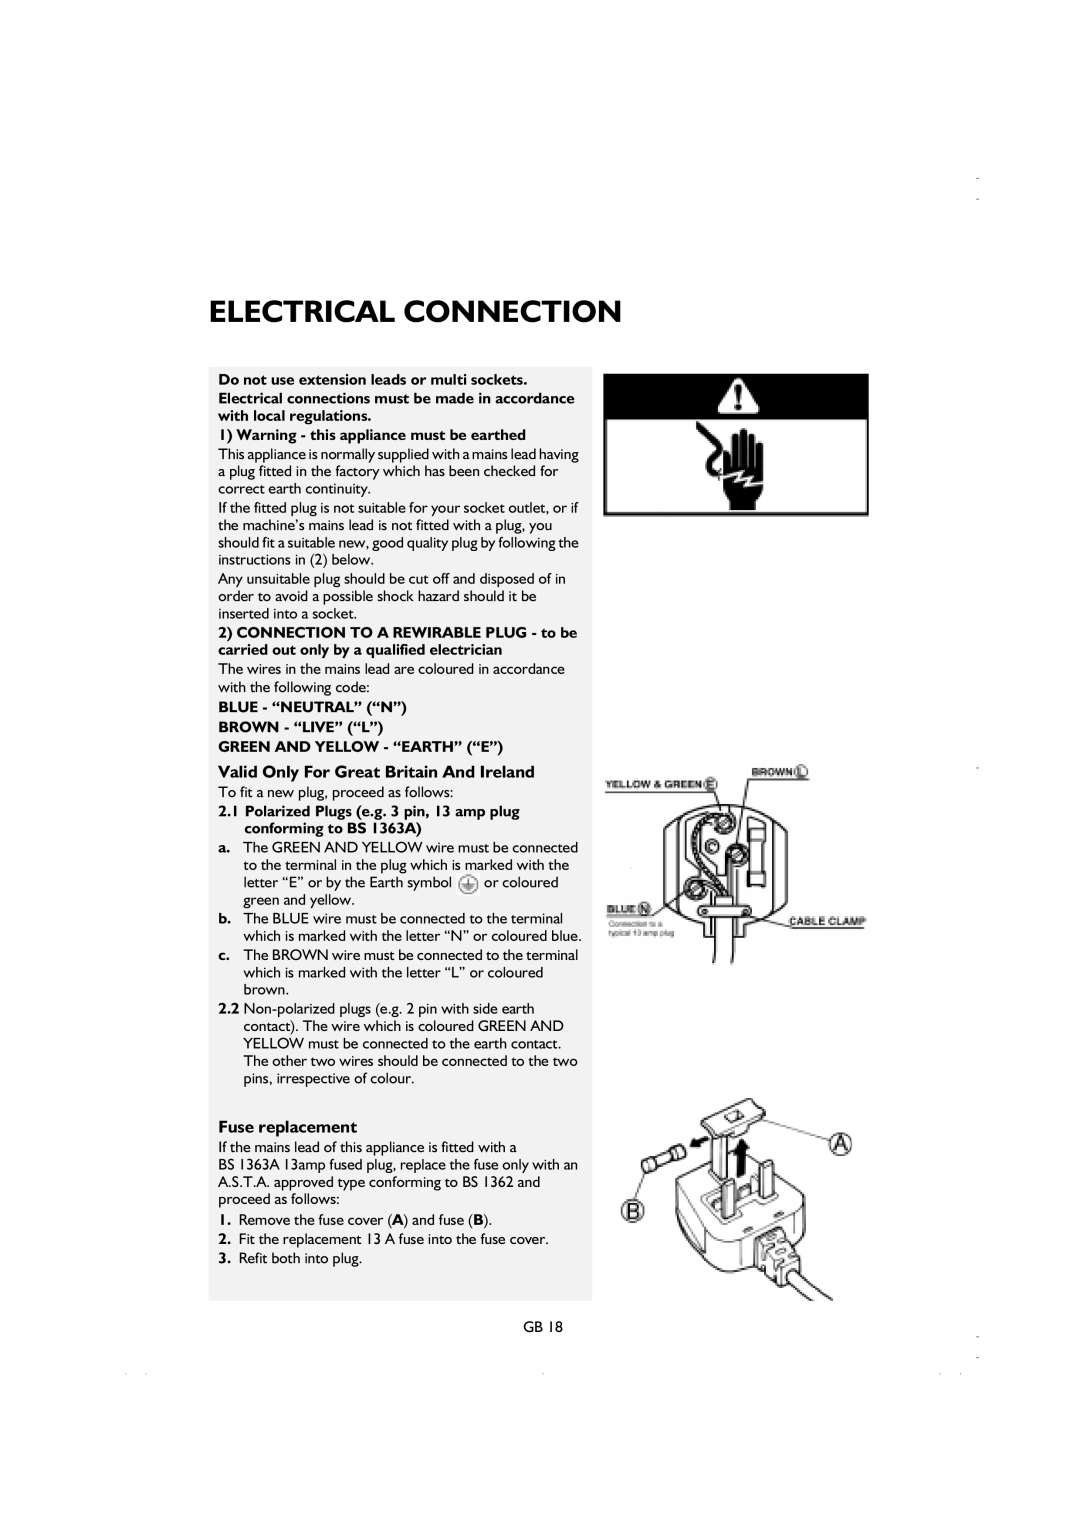 Smeg K600TL1 manual Electrical Connection, Valid Only For Great Britain And Ireland, Fuse replacement 